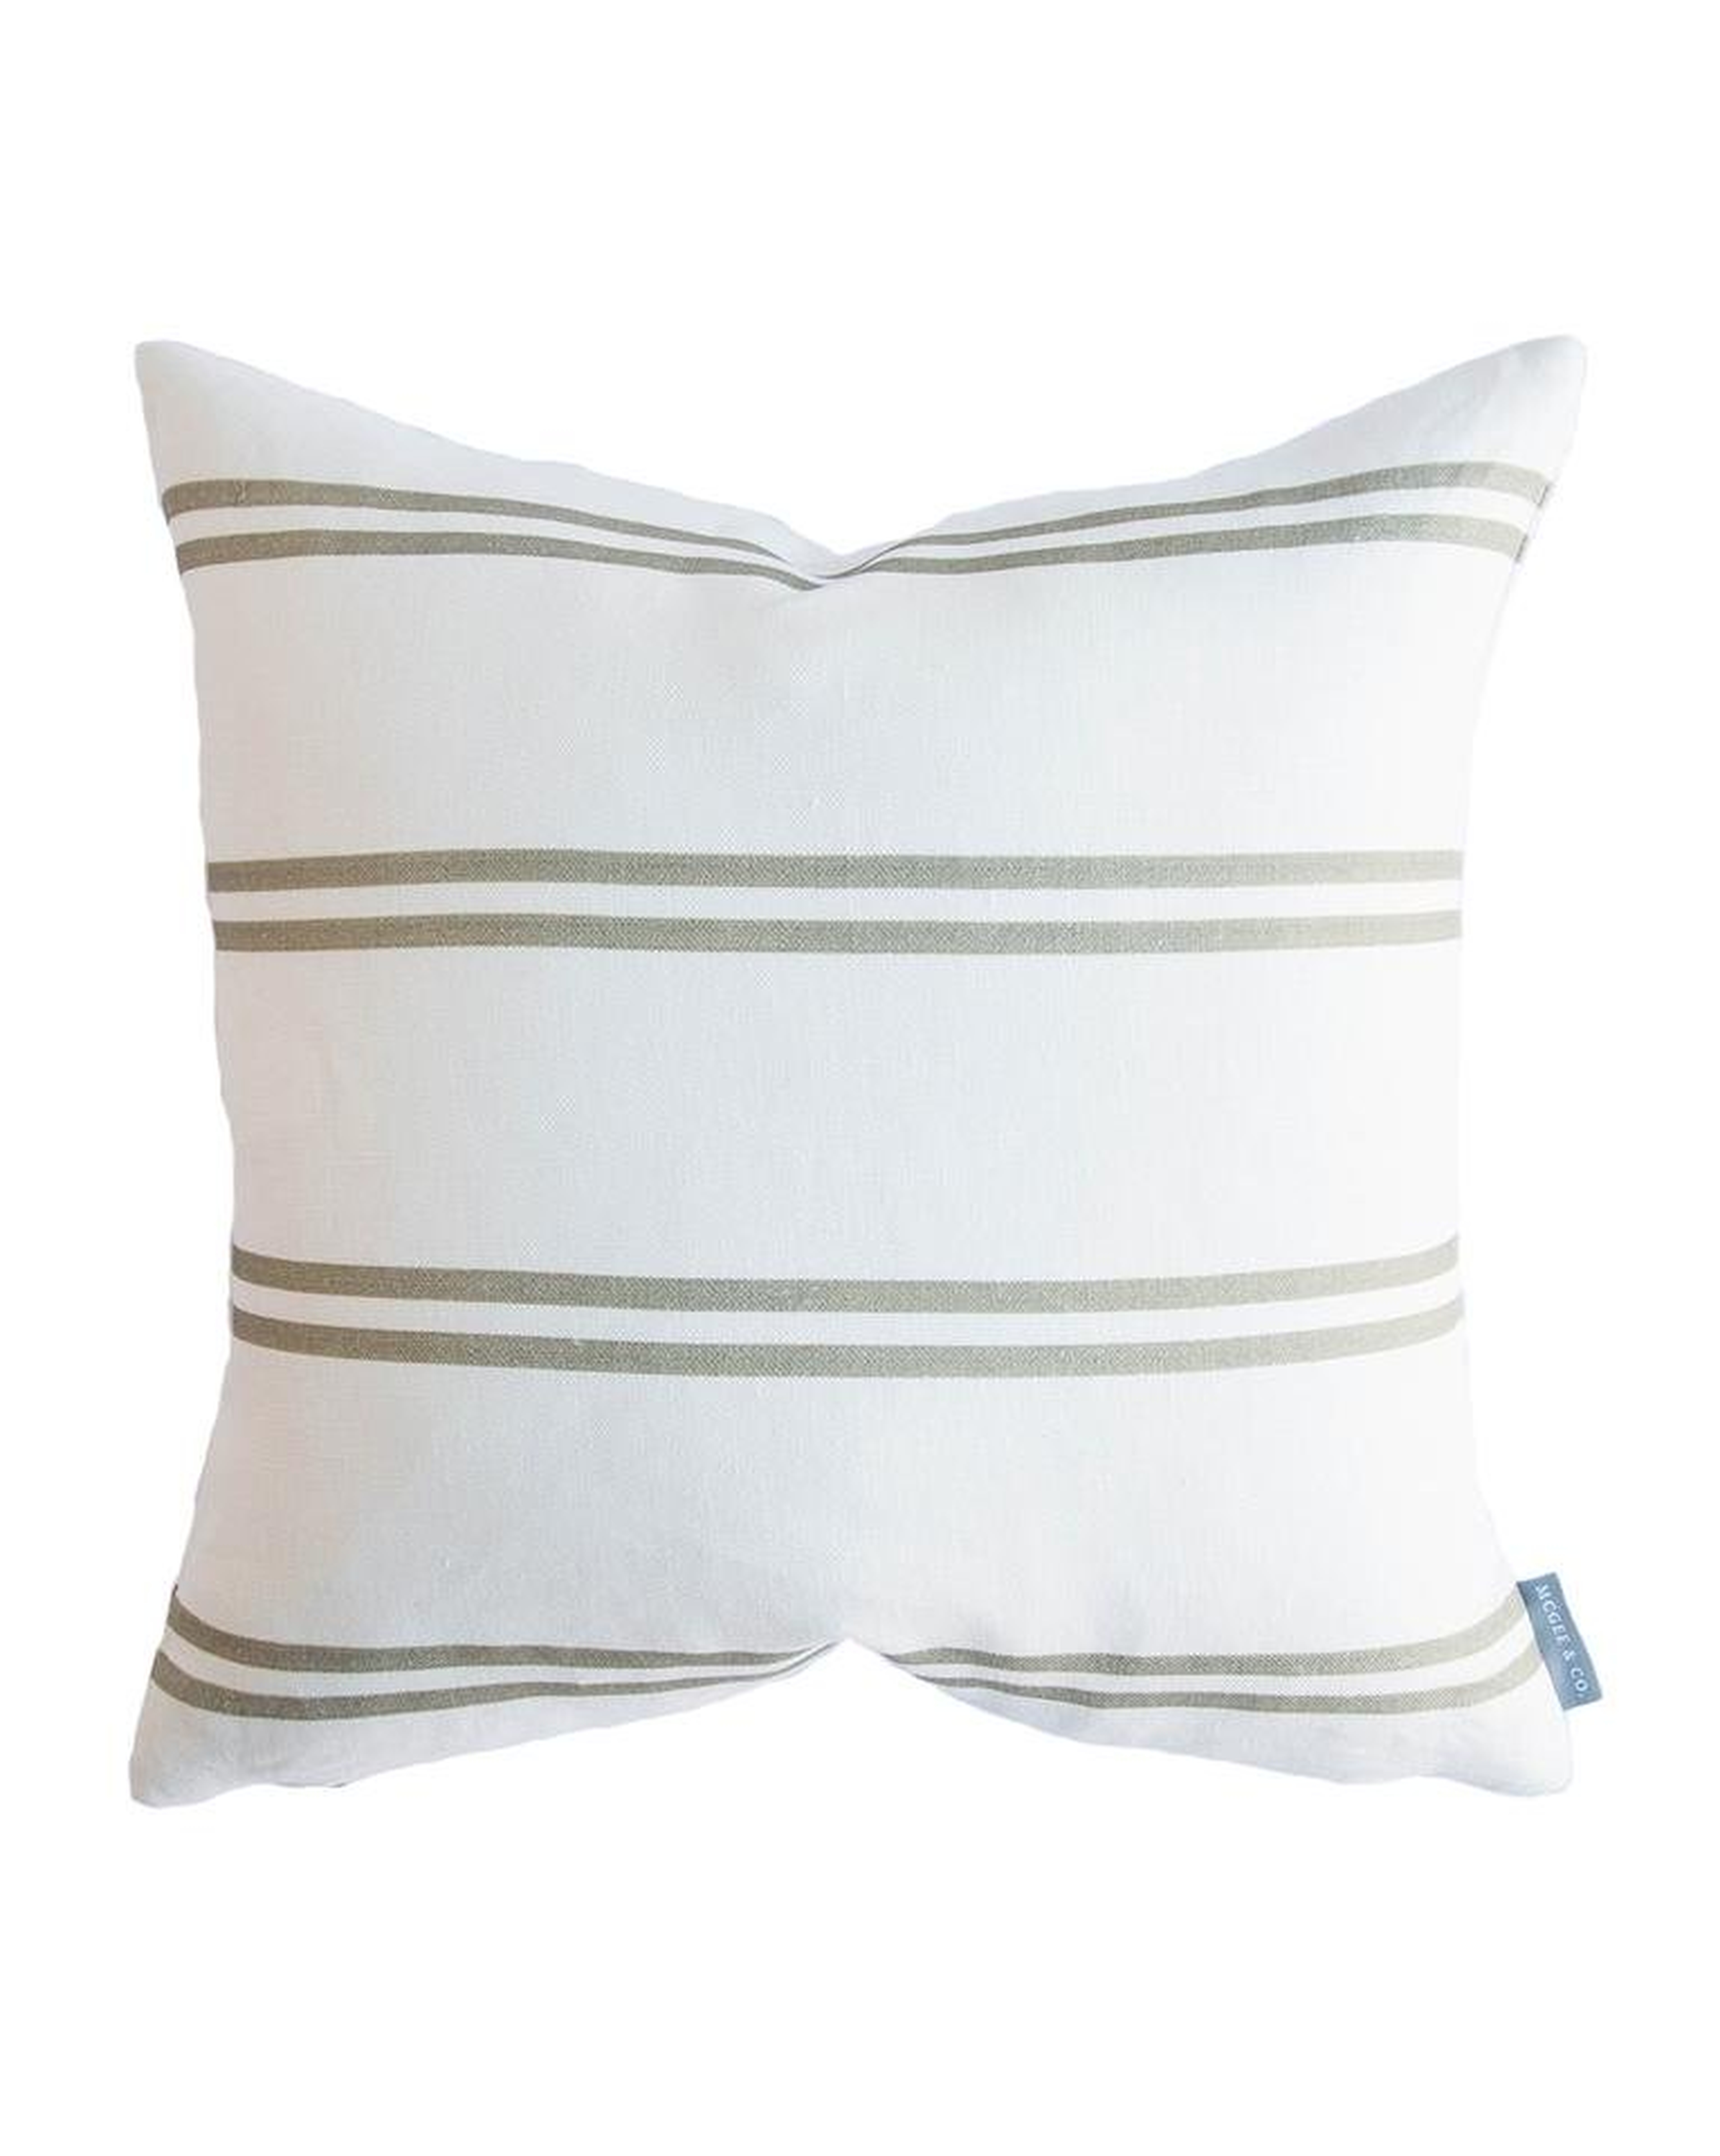 FRANKLIN OLIVE STRIPE PILLOW WITHOUT INSERT, 14" x 20" - McGee & Co.